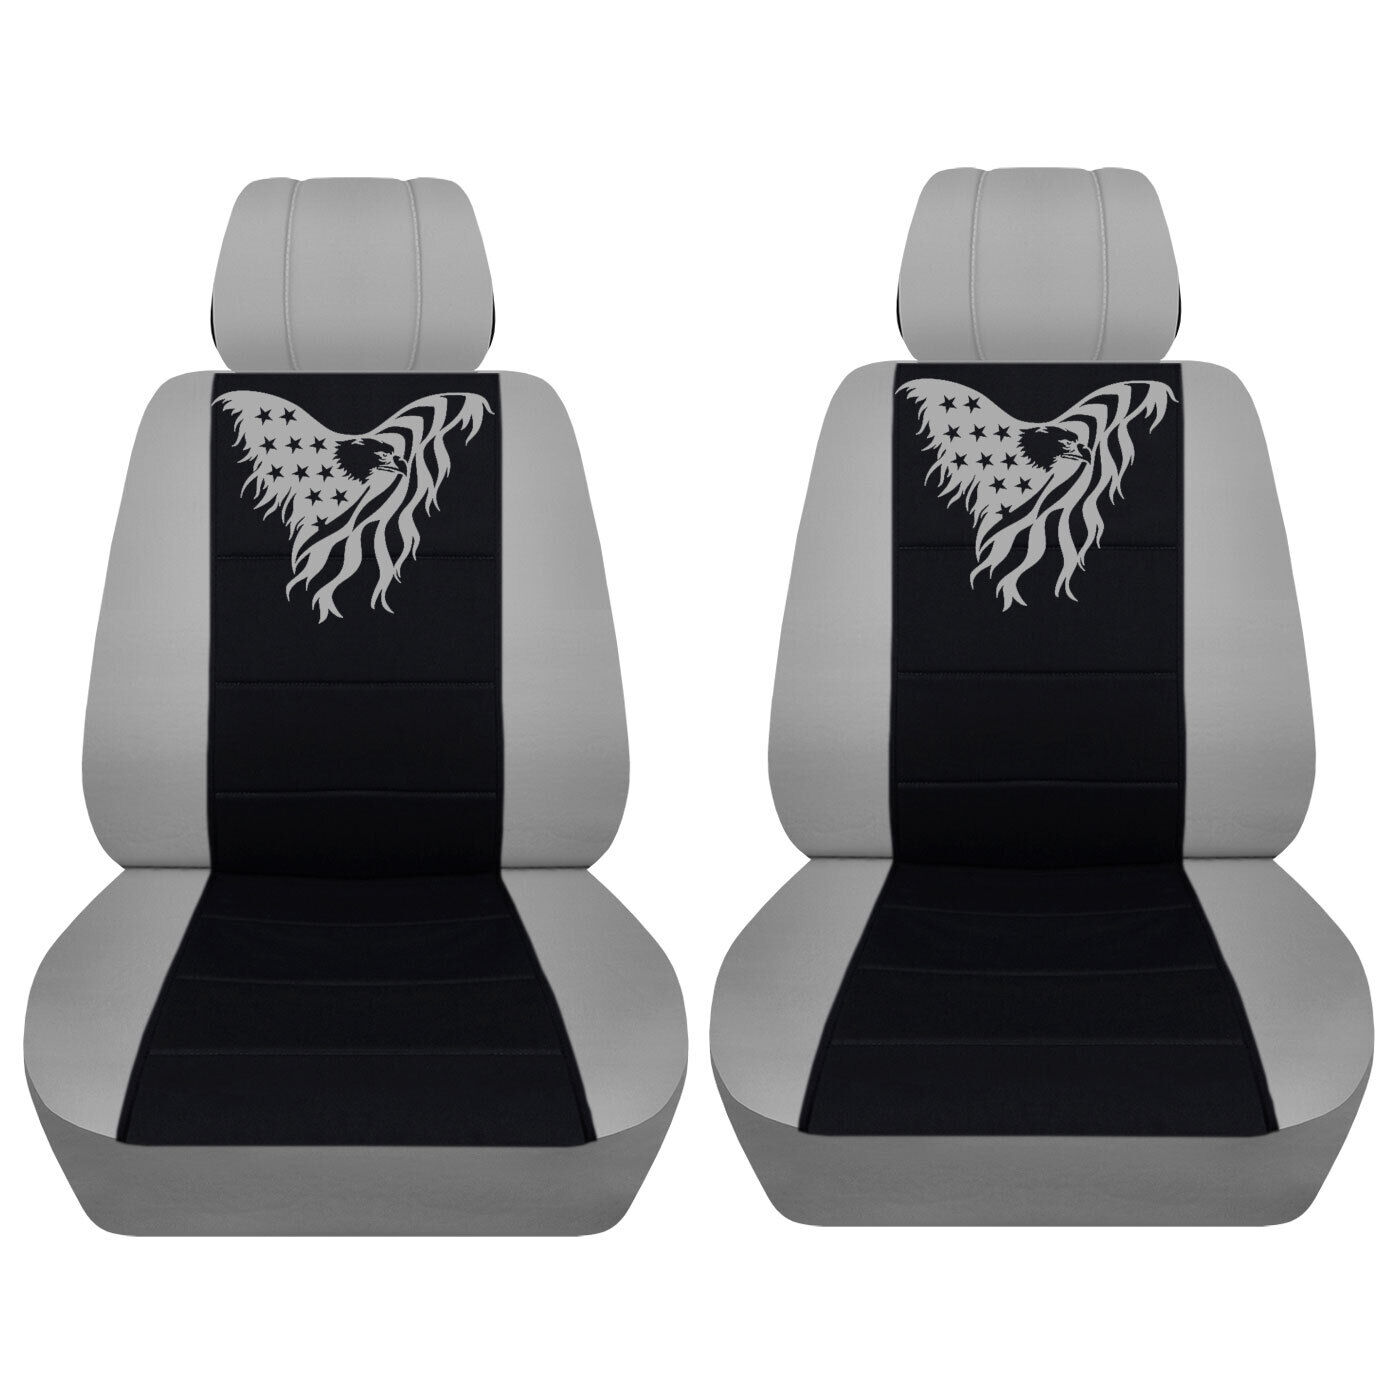 Front Seat Covers Fits 2006, 2007, 2008 Dodge Ram Silver and Black Eagle Flag